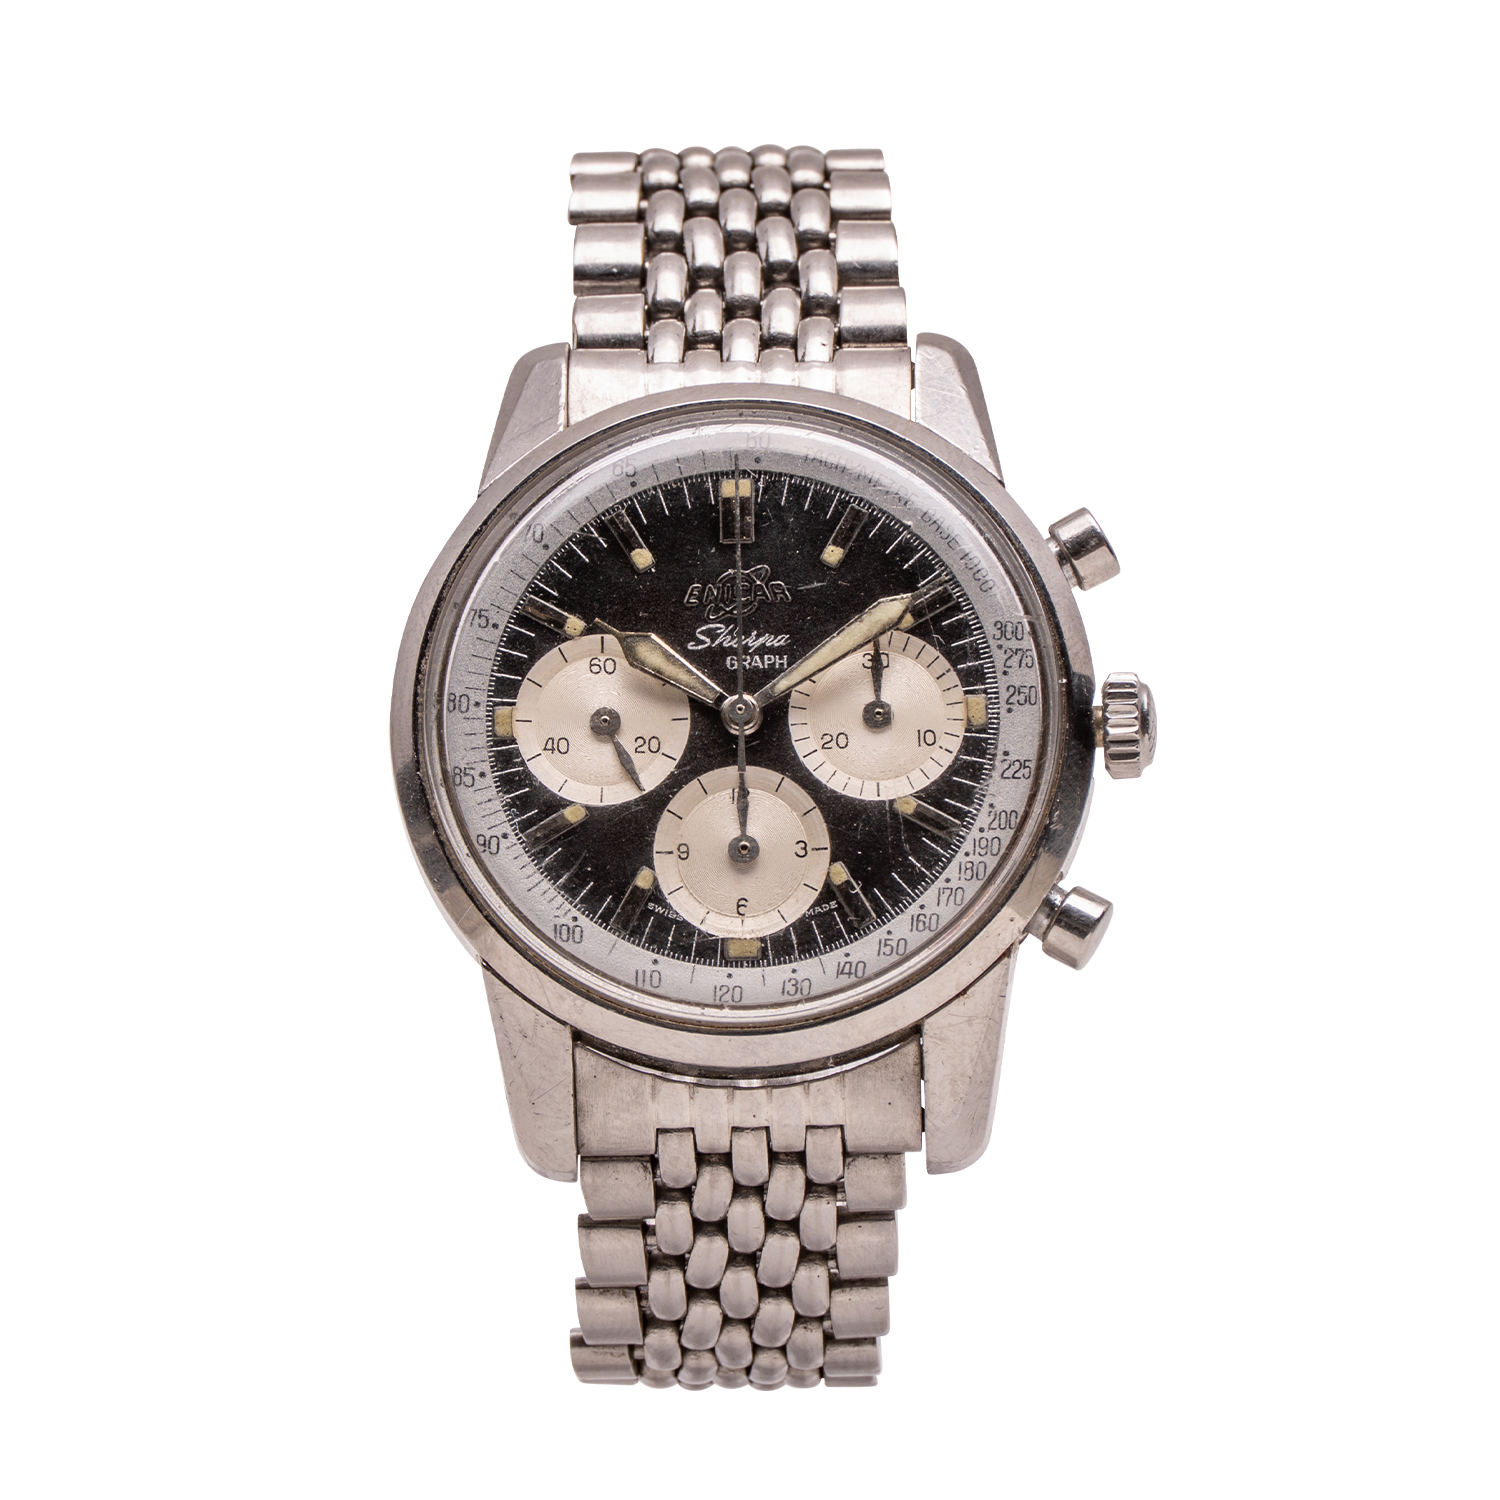 1960 Enica Sherpa Graph Mark 1A chronograph with gladius hands, CA$22,420